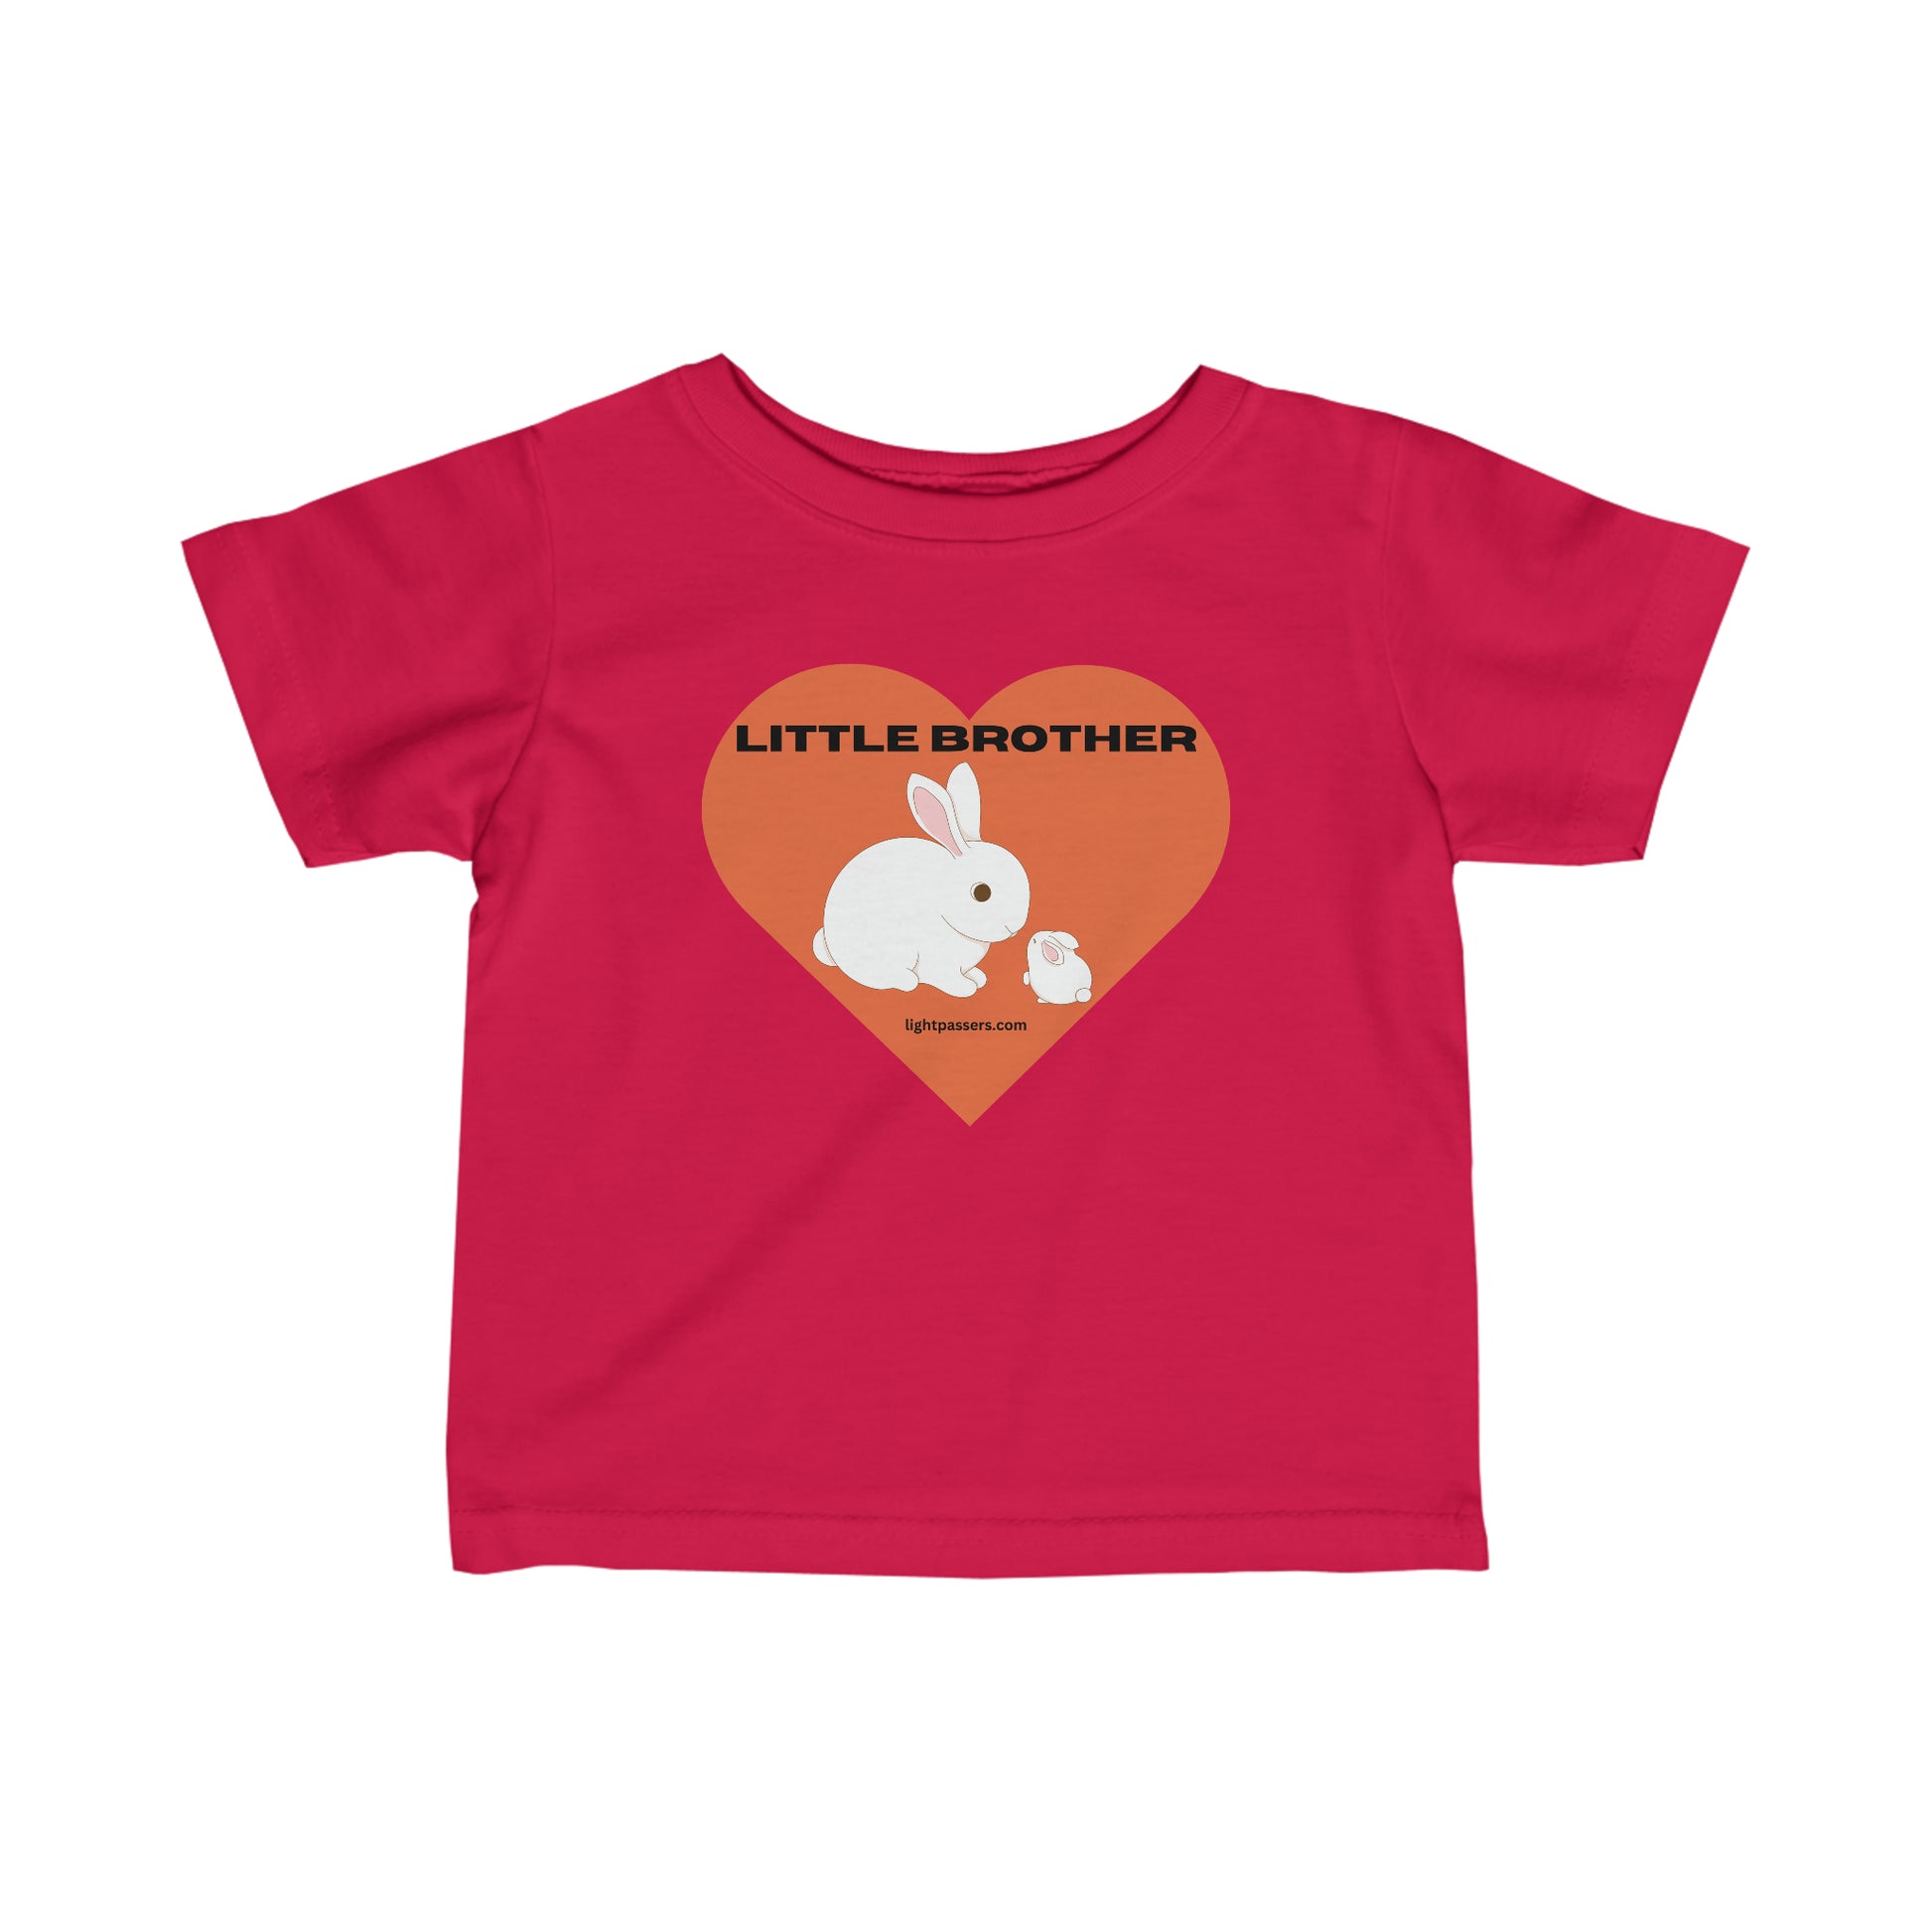 A baby t-shirt featuring a pink fabric with a white rabbit and heart design. Infant fine jersey tee with side seams, ribbed knitting, and taped shoulders for durability and comfort.